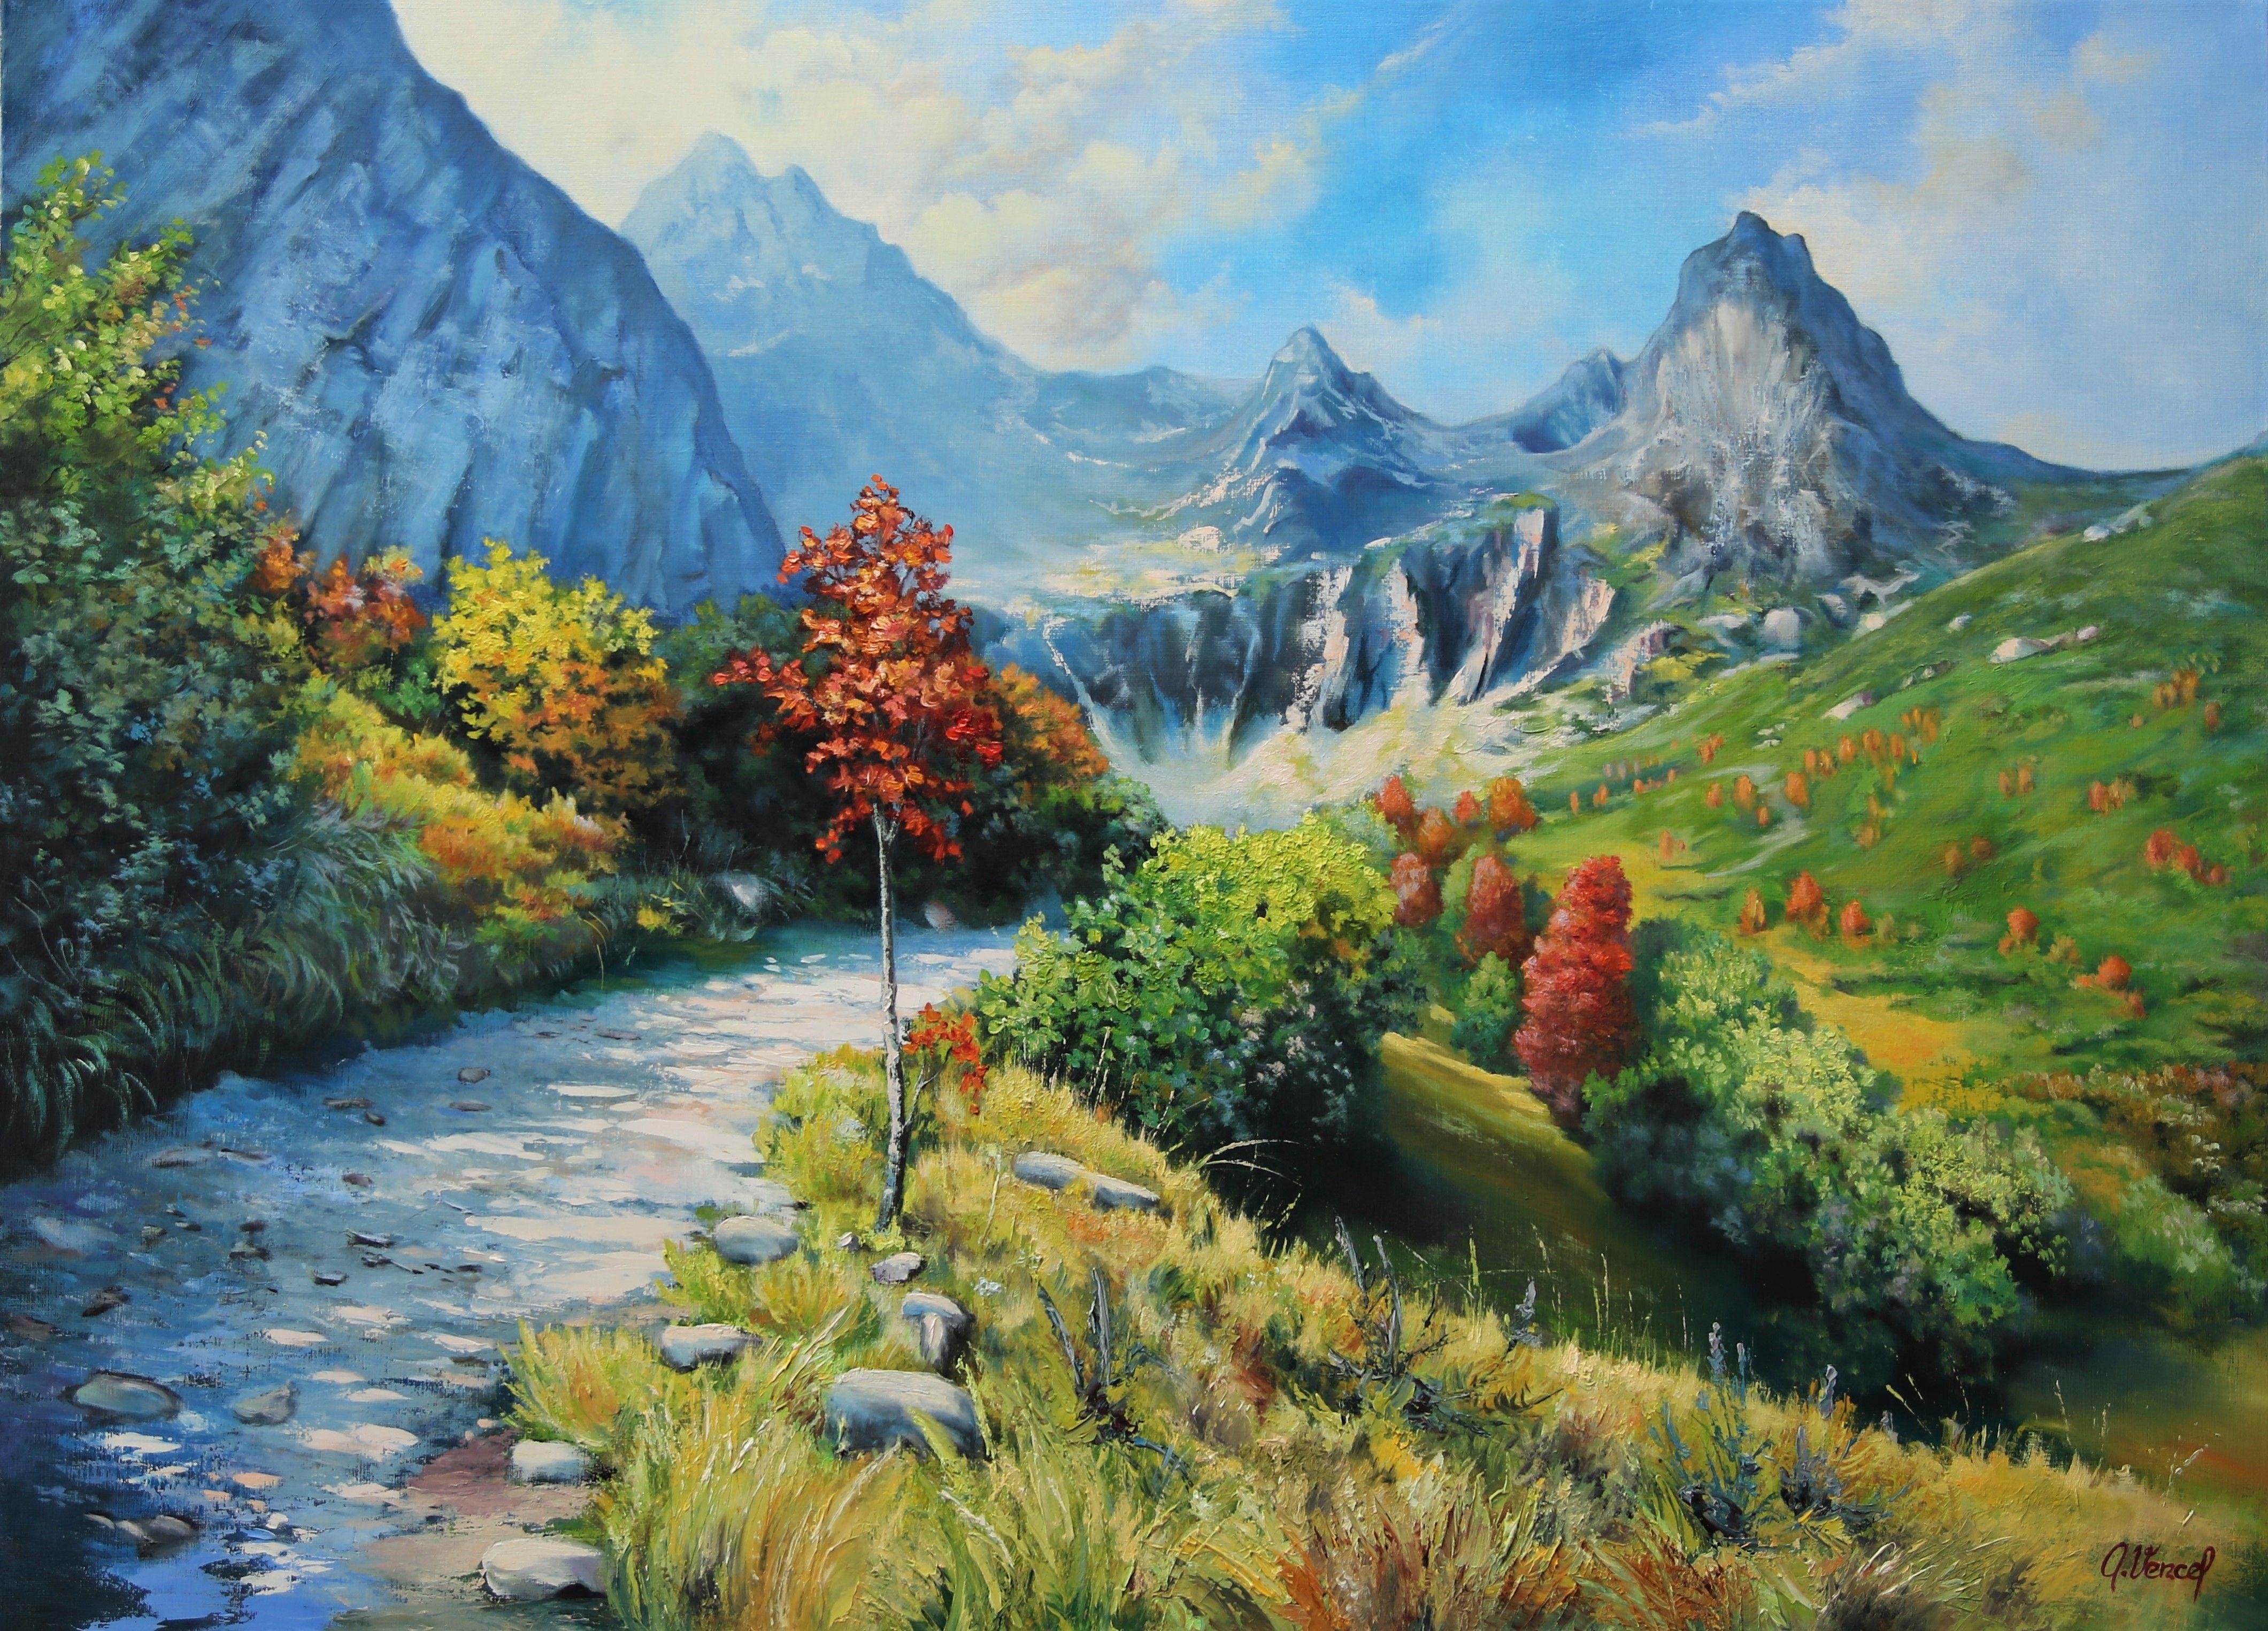 Mountain landscape, Painting, Oil on Canvas